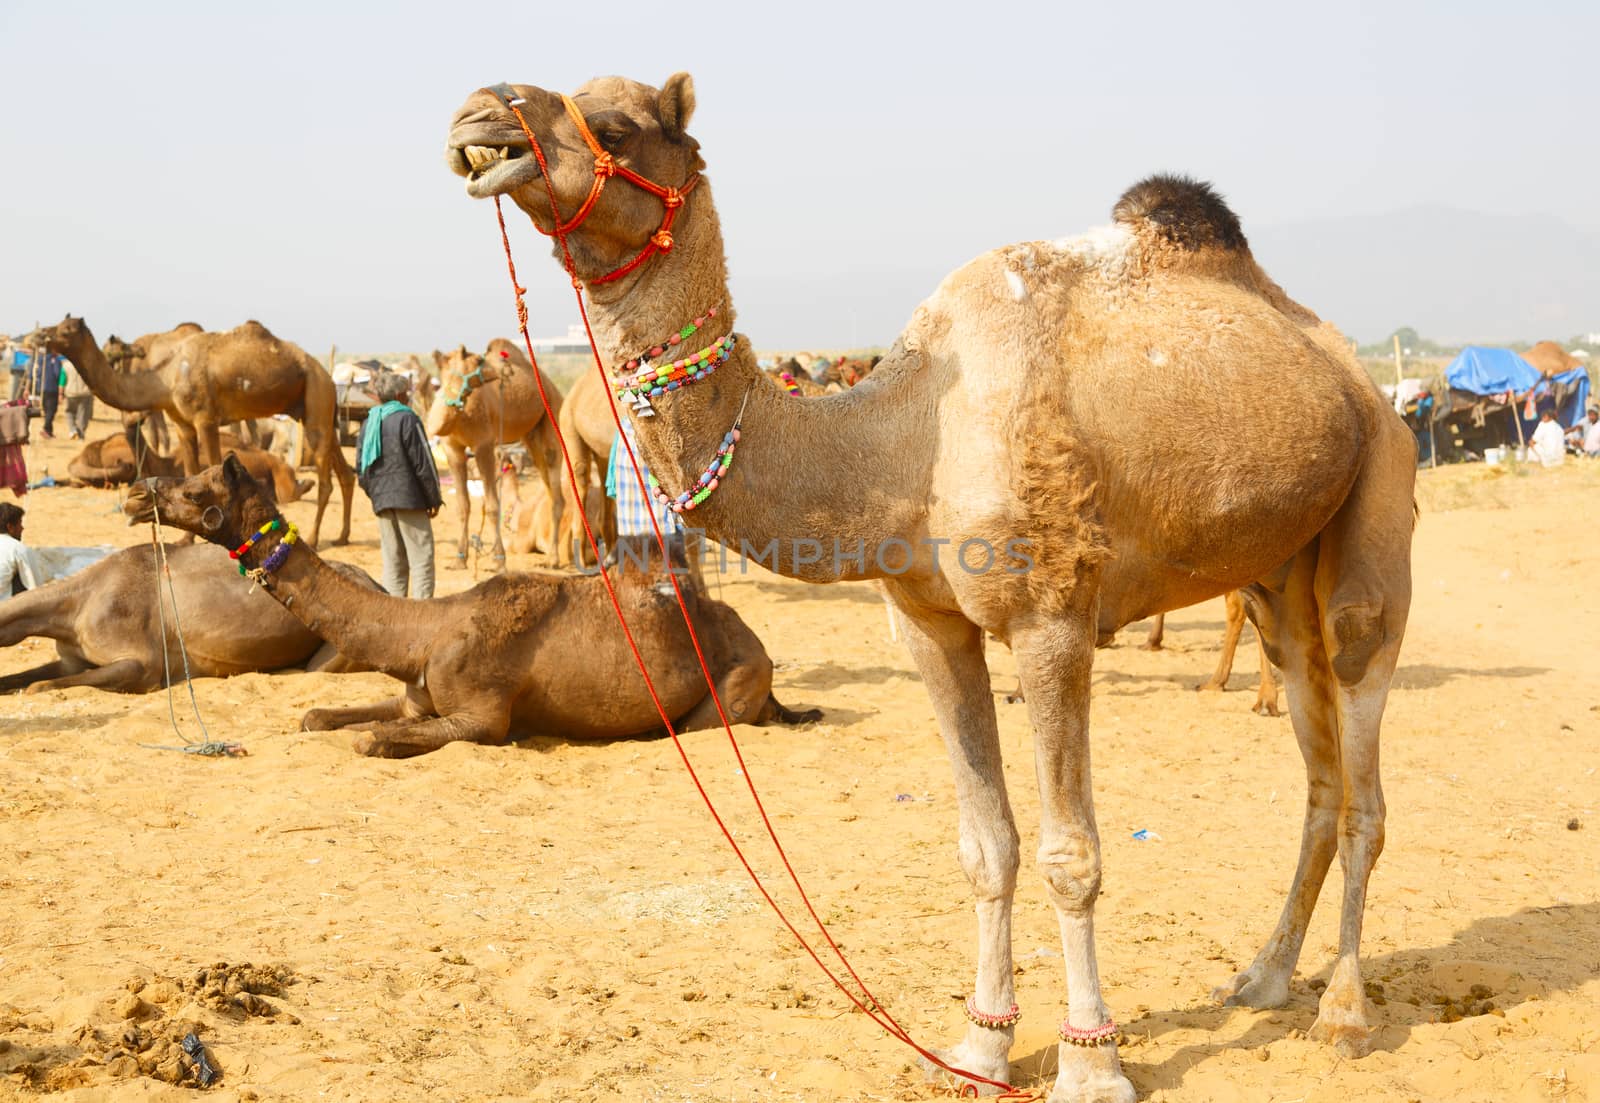 On of the thousands of decorated camels at the Pushkar Fair,held every year in November in Rajasthan.